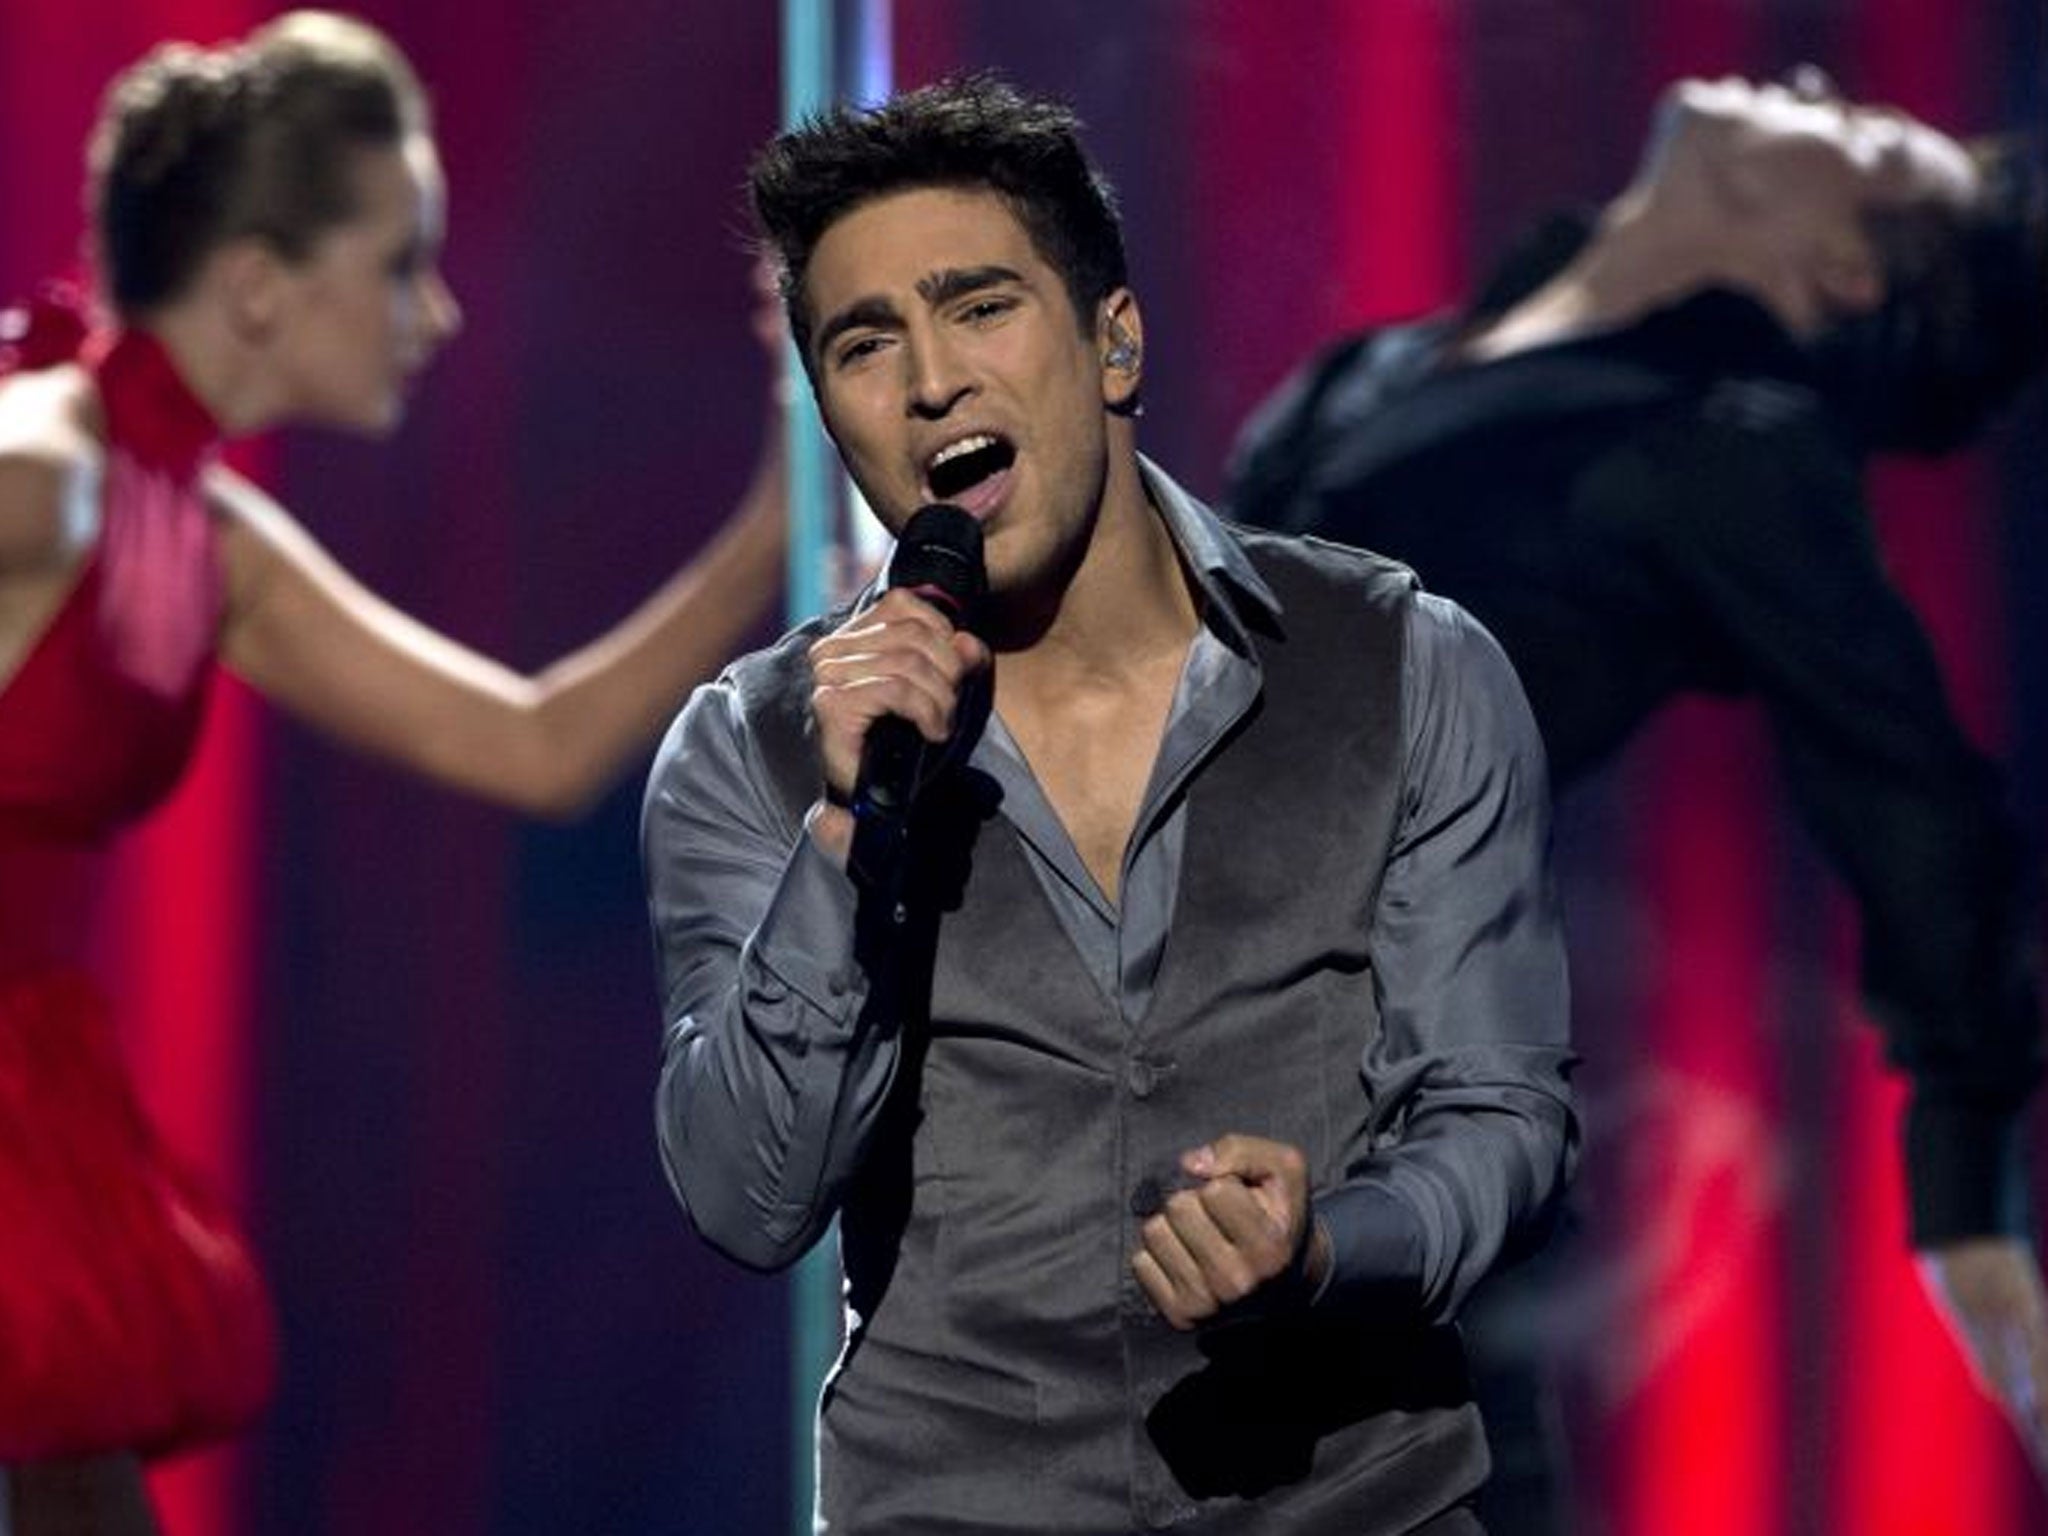 Farid Mammadov of Azerbaijan came second in this year's Eurovision